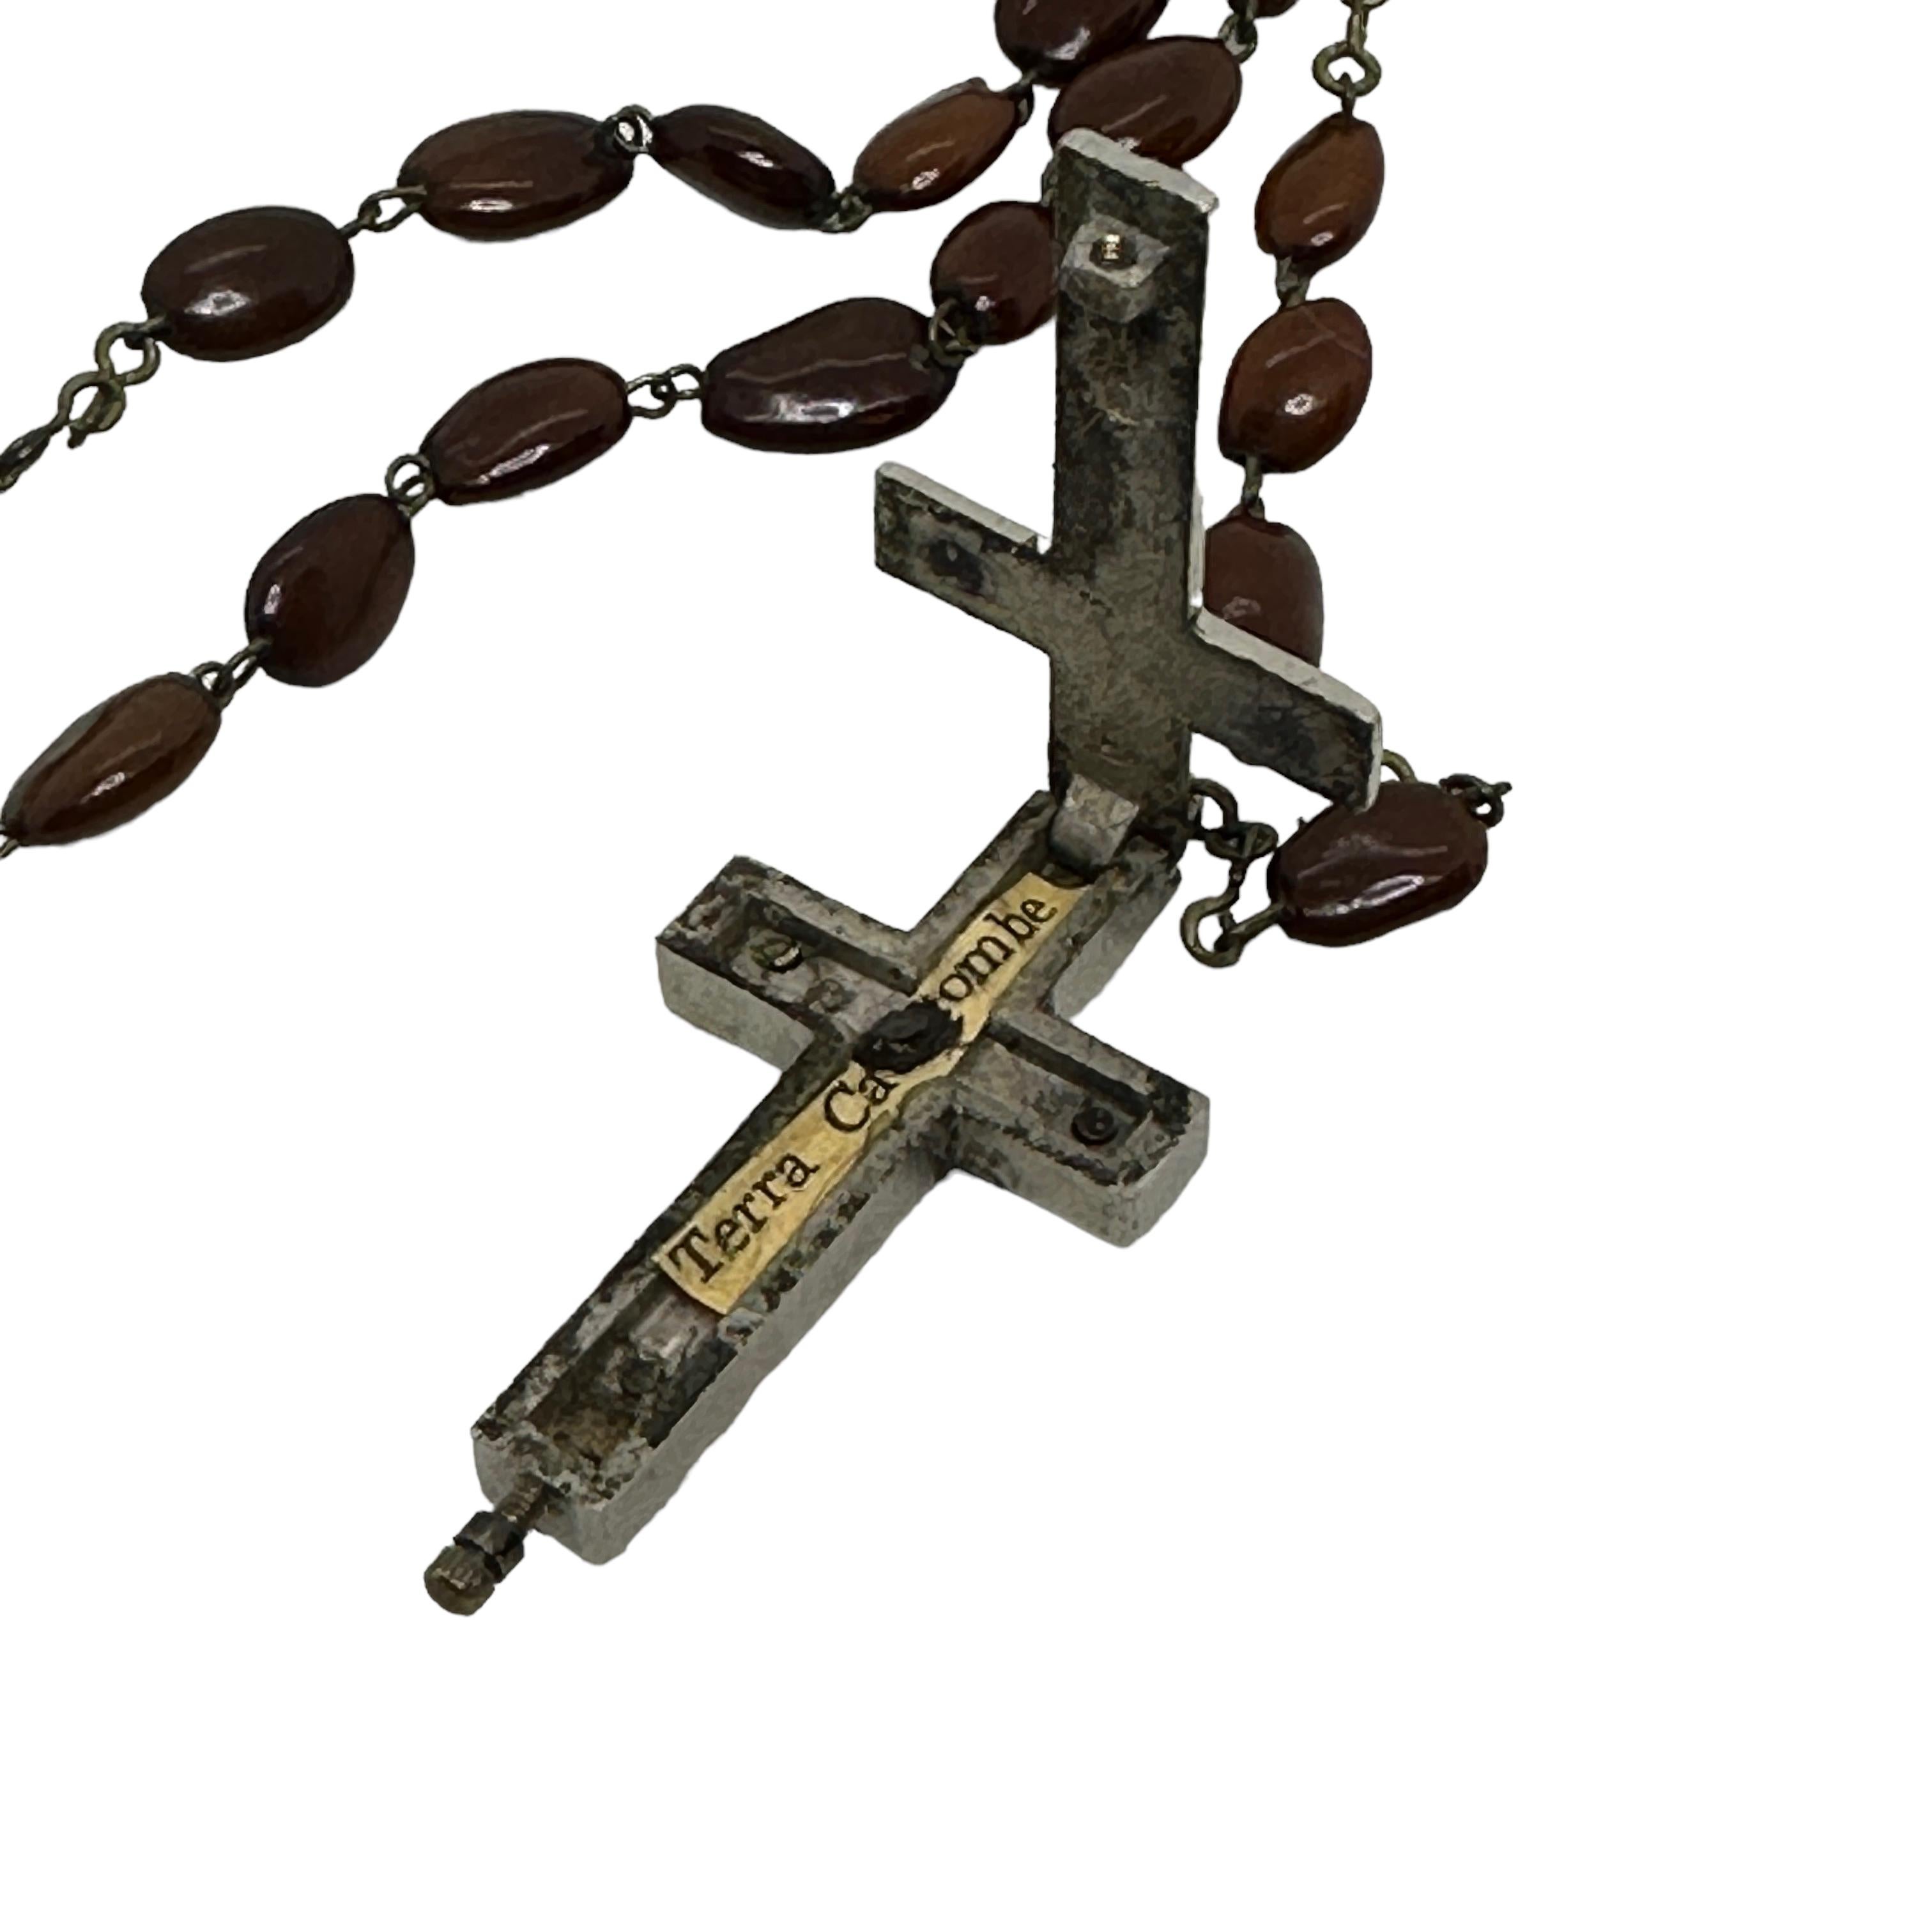 Rosary Catholic Reliquary Box Crucifix Pendant with Relics of Catacombs of Rome 1